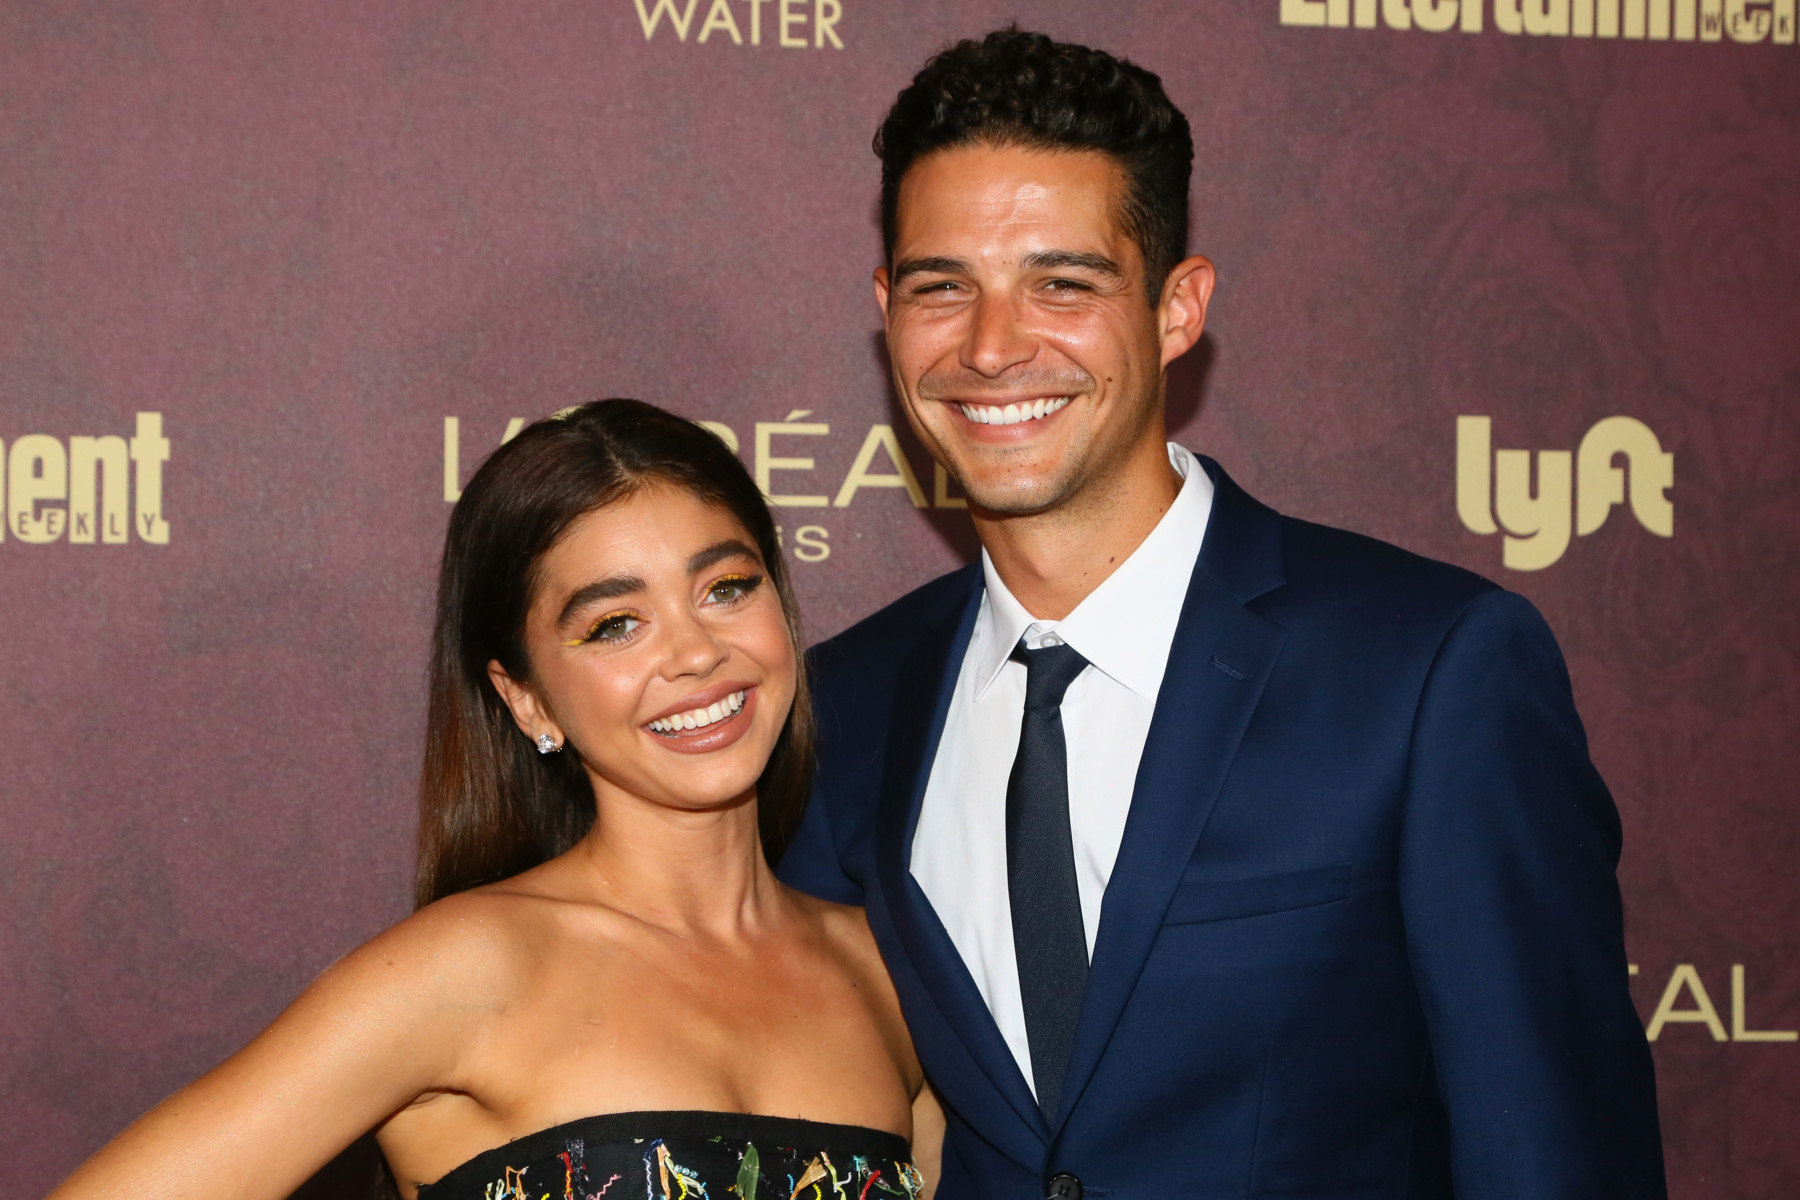 Fans think one of the clues references her fiance Wells Adams